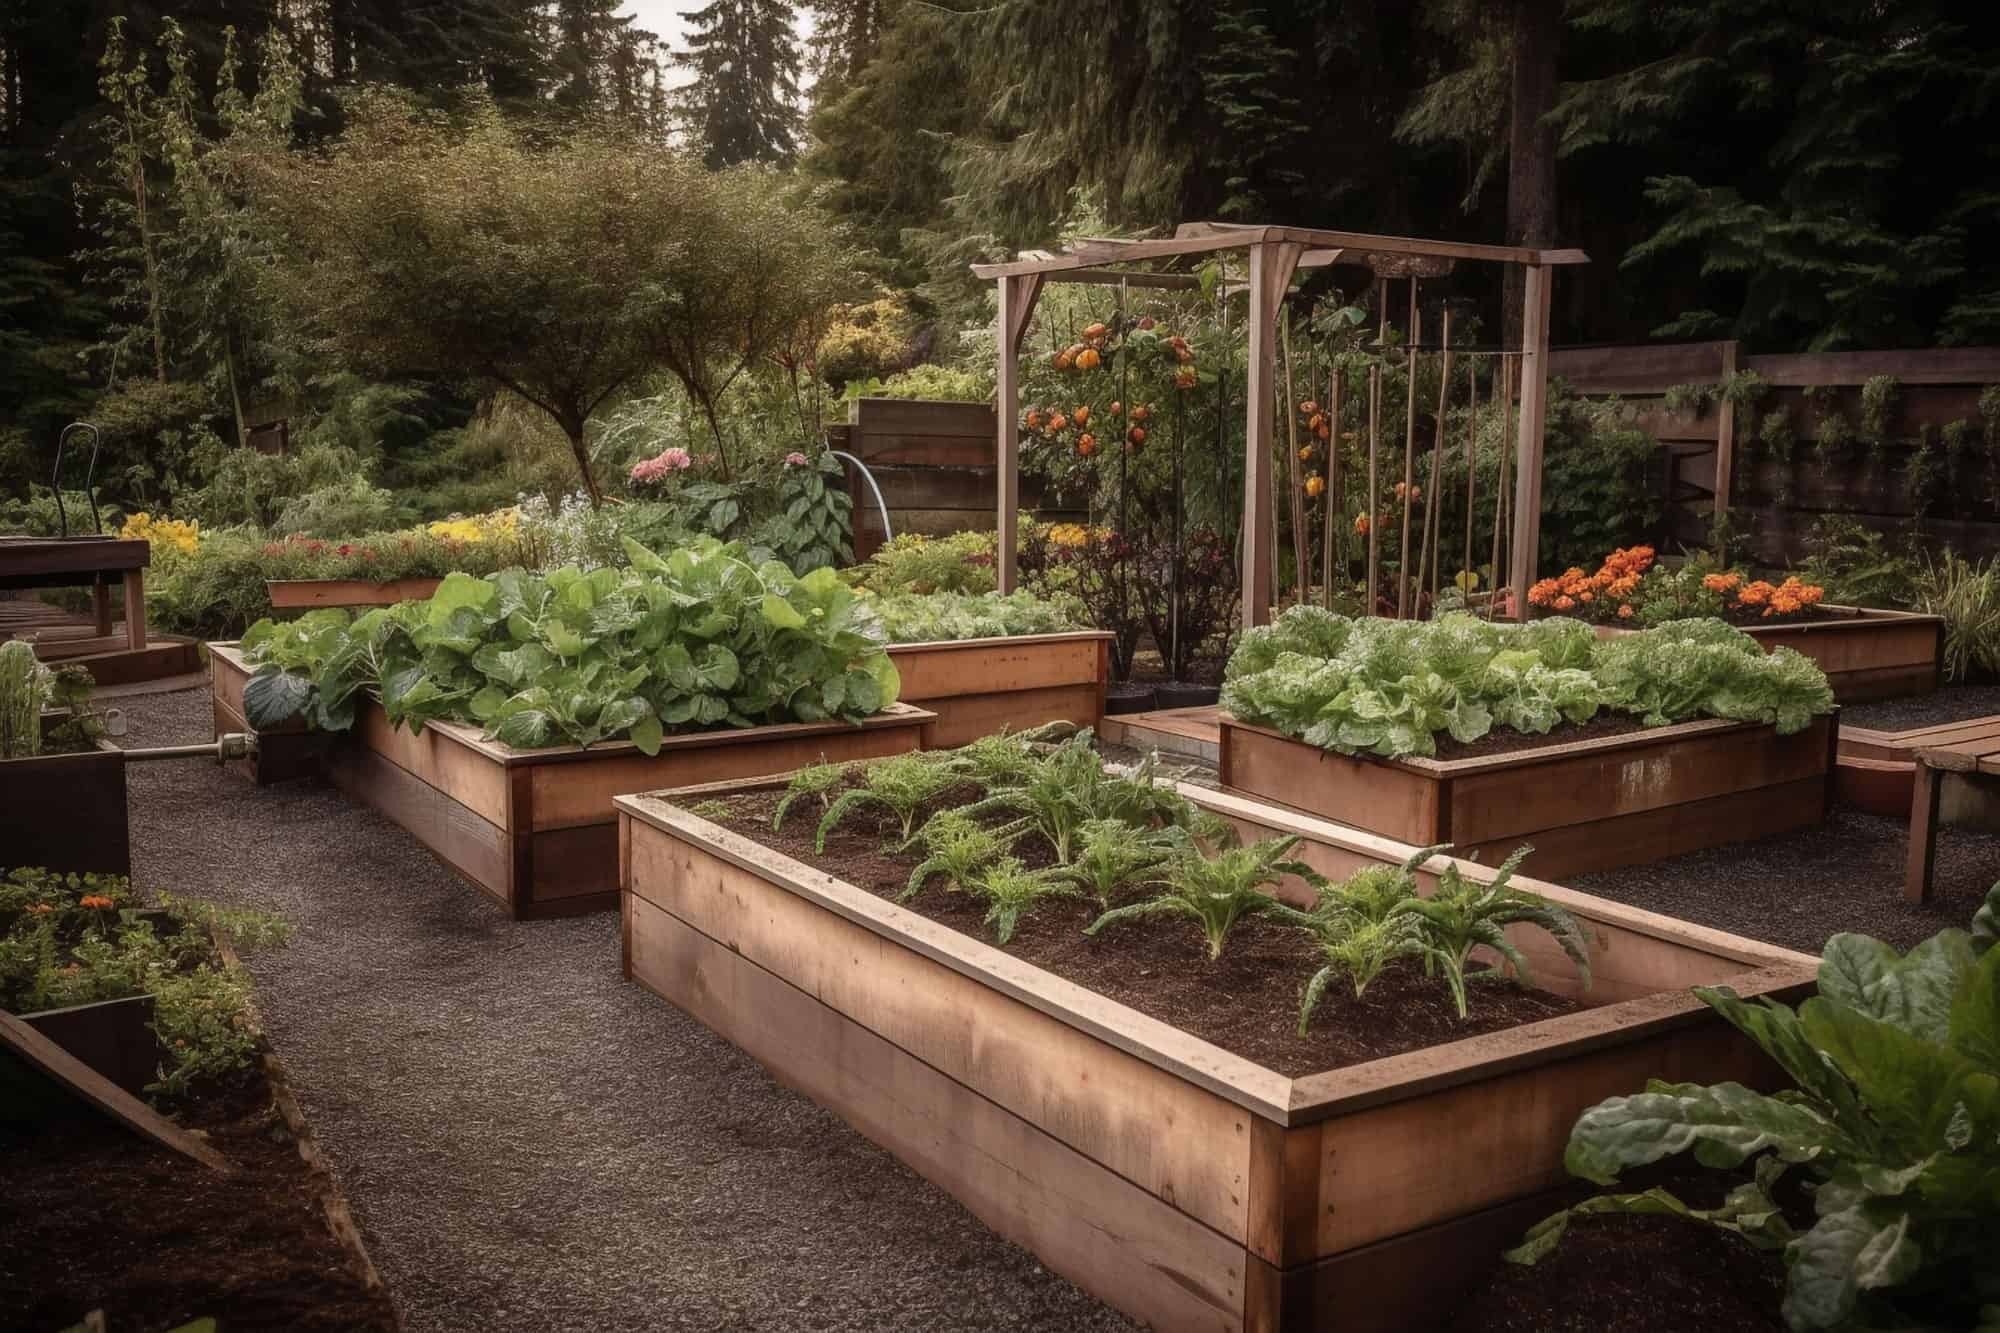 How High Should Raised Garden Bed Be